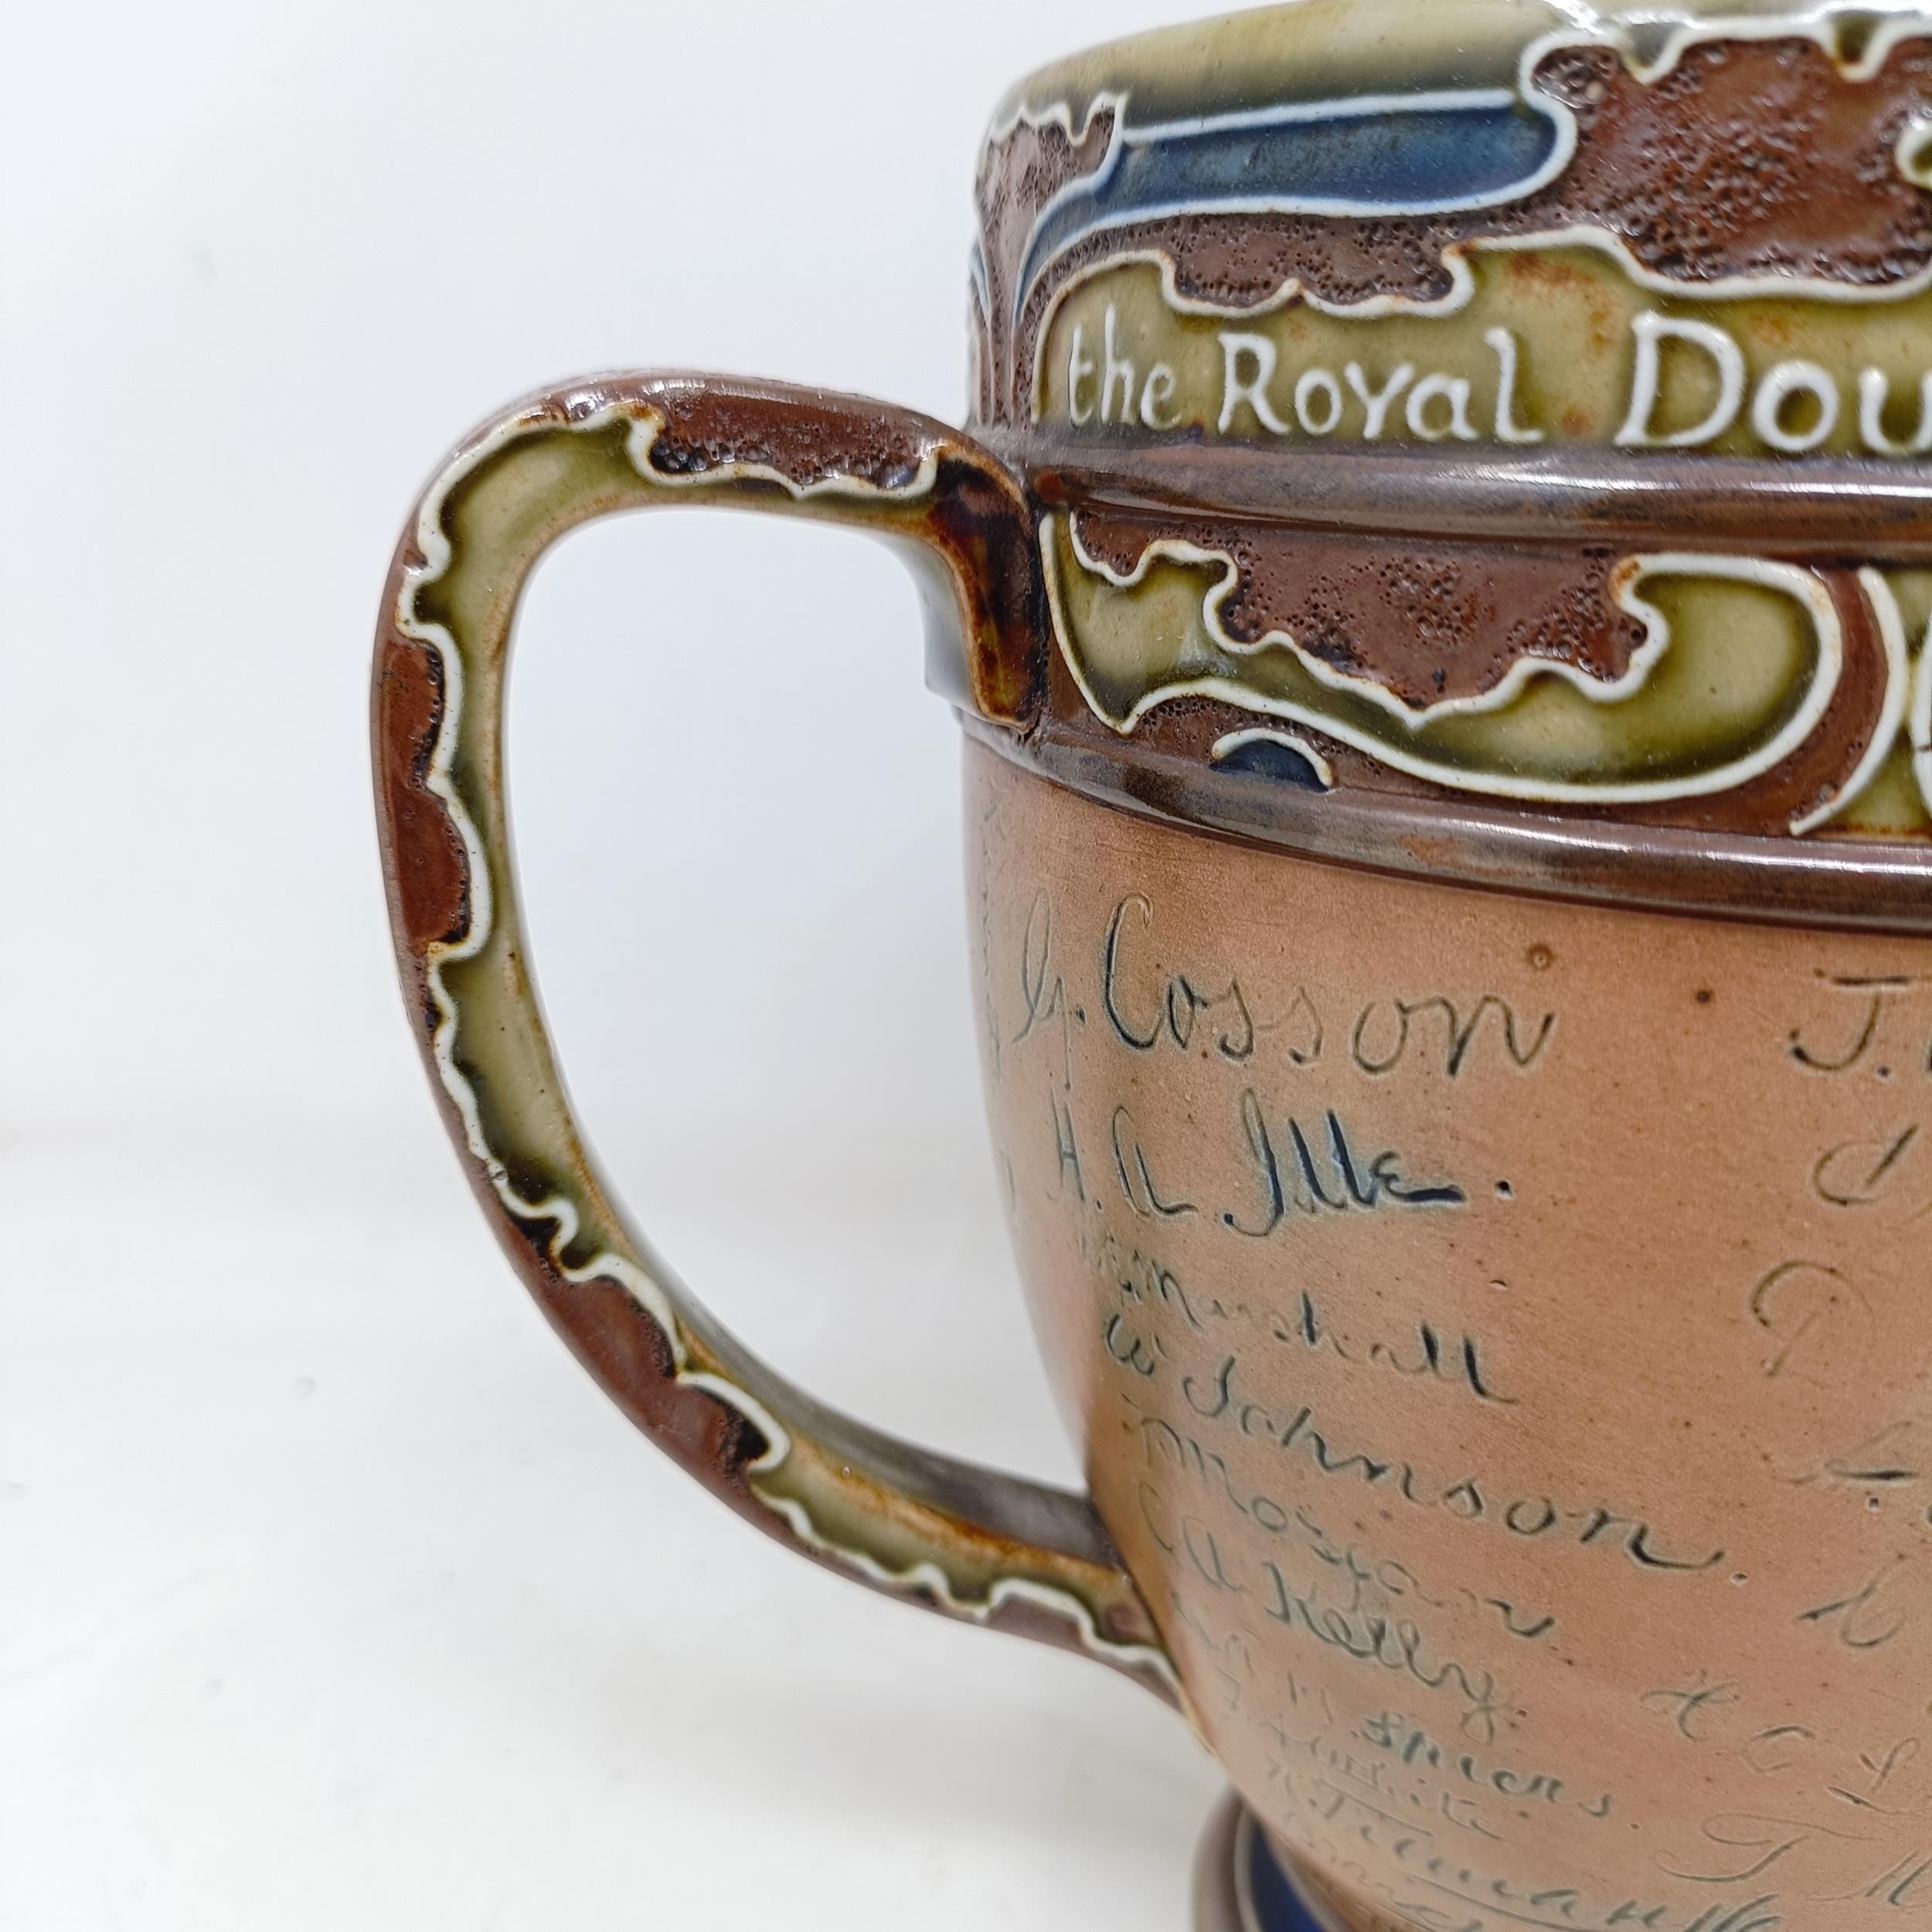 A Royal Doulton three handled retirement loving cup, by Mark Marshall, with various signatures of - Image 9 of 11